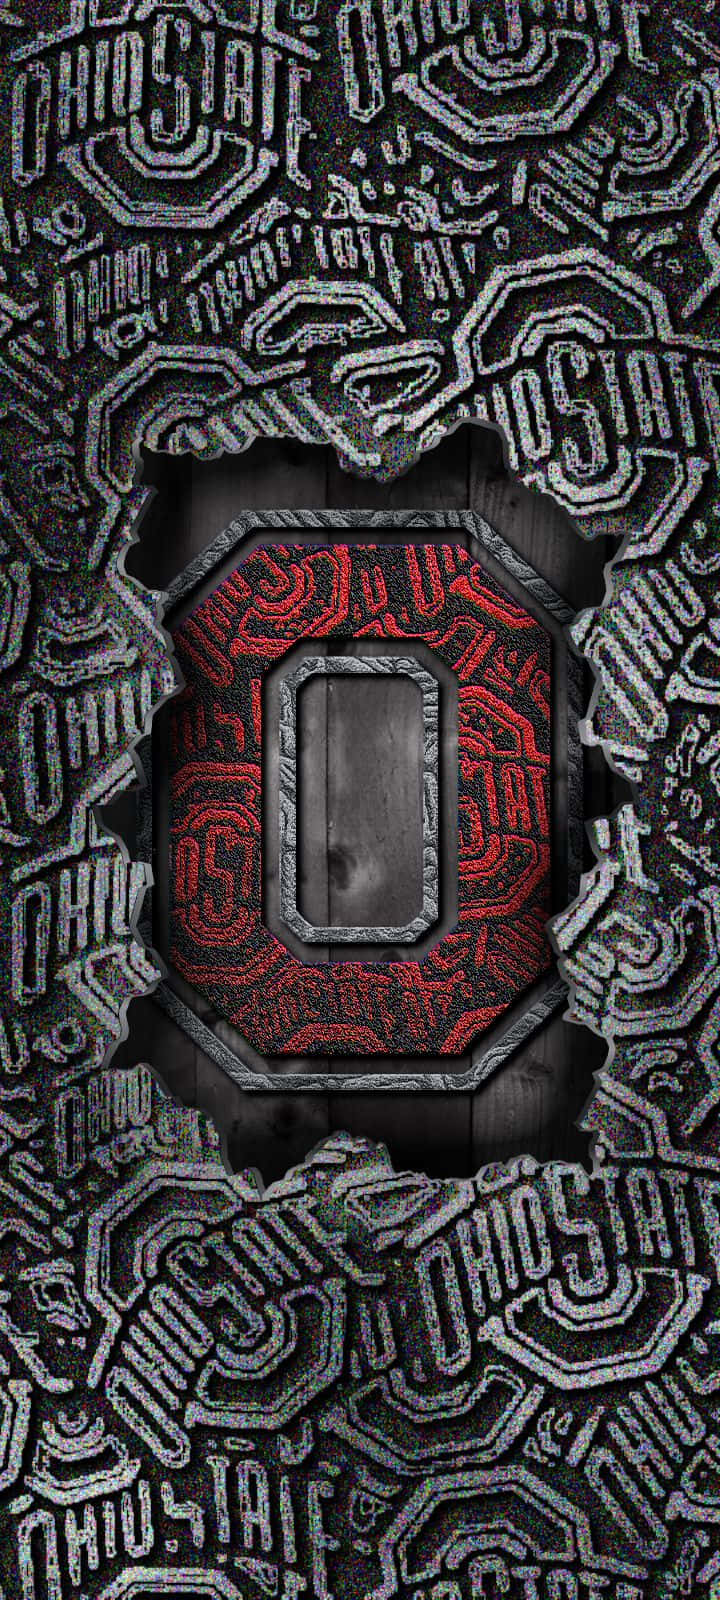 Ohio State Iphone Screen Background Wallpaper